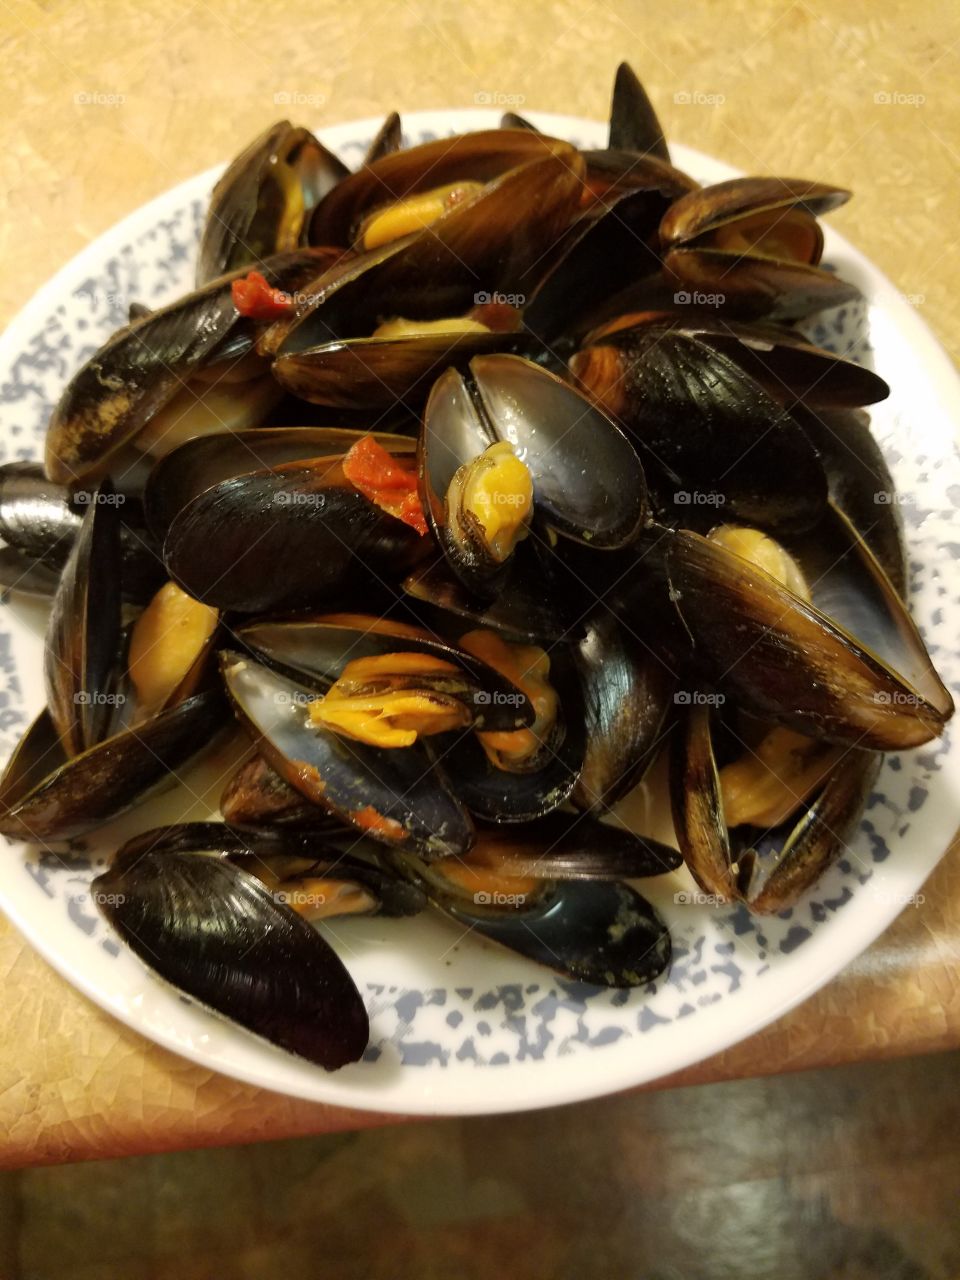 A plateful of mussels in white wine!